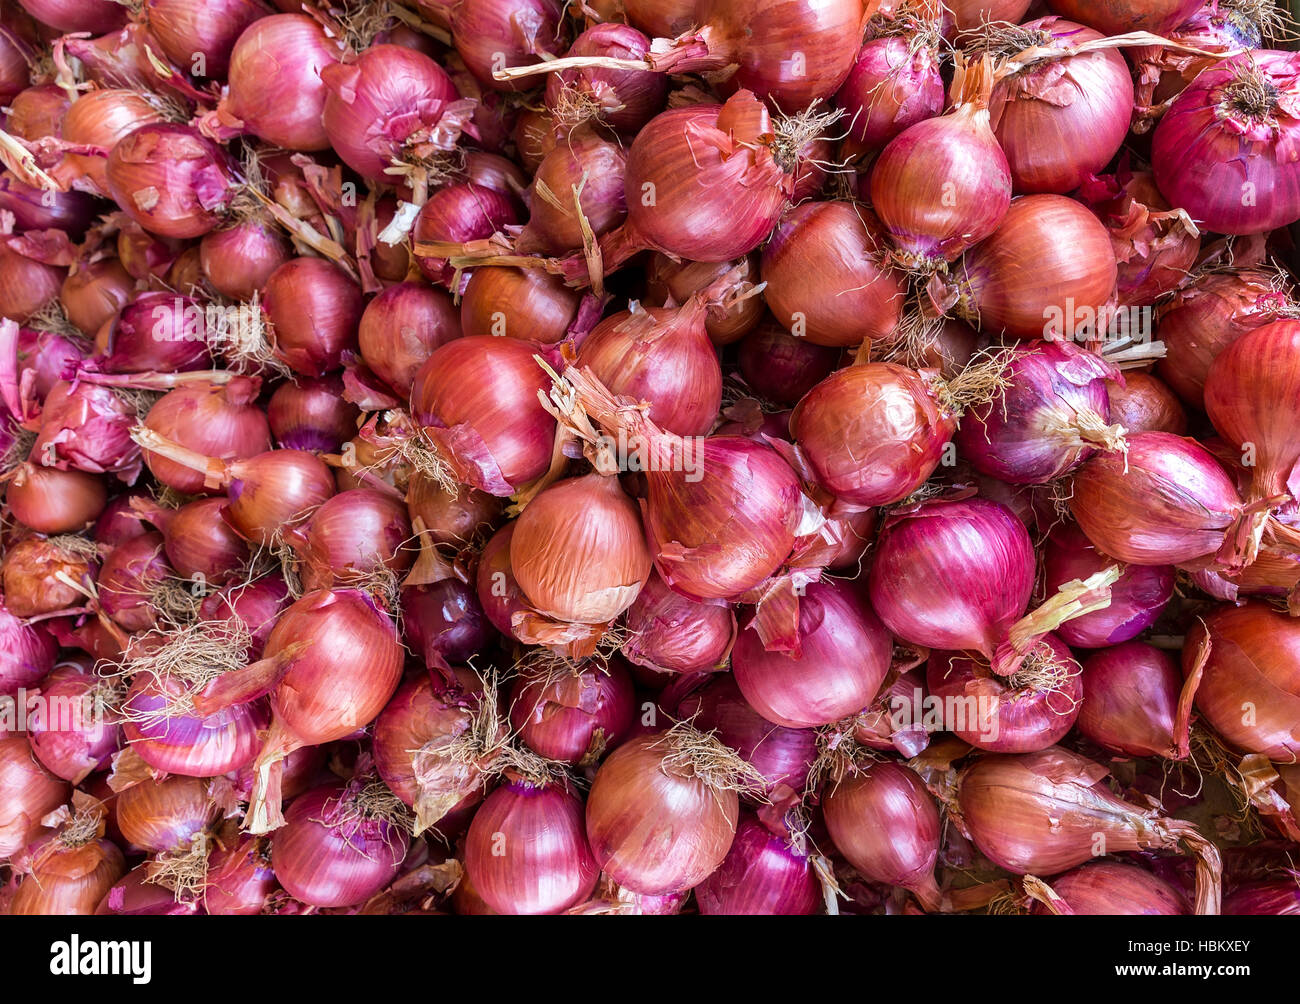 Heap of red onions on market Stock Photo